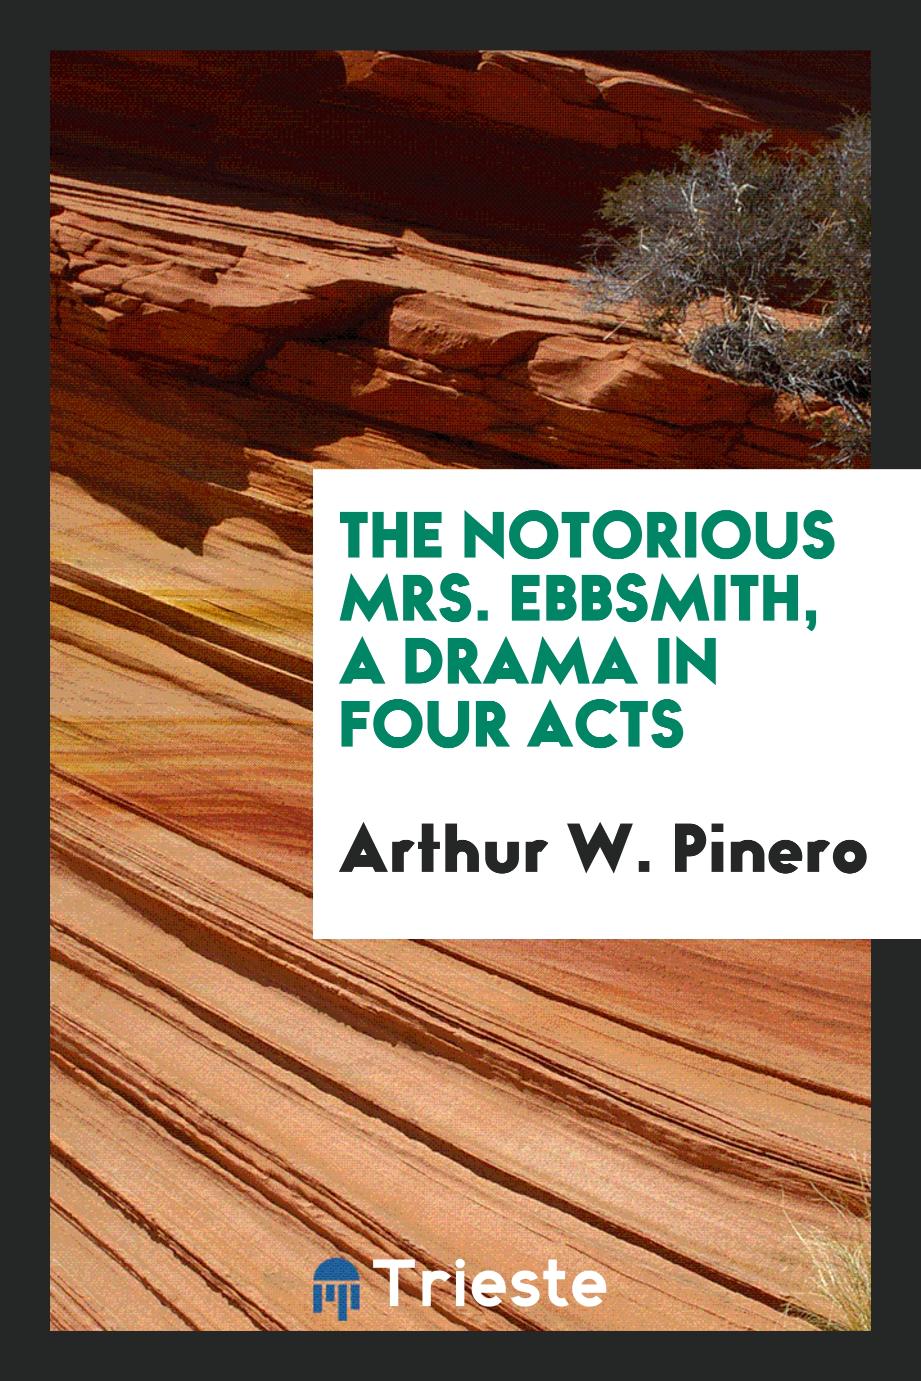 Arthur W. Pinero - The Notorious Mrs. Ebbsmith, a Drama in Four Acts